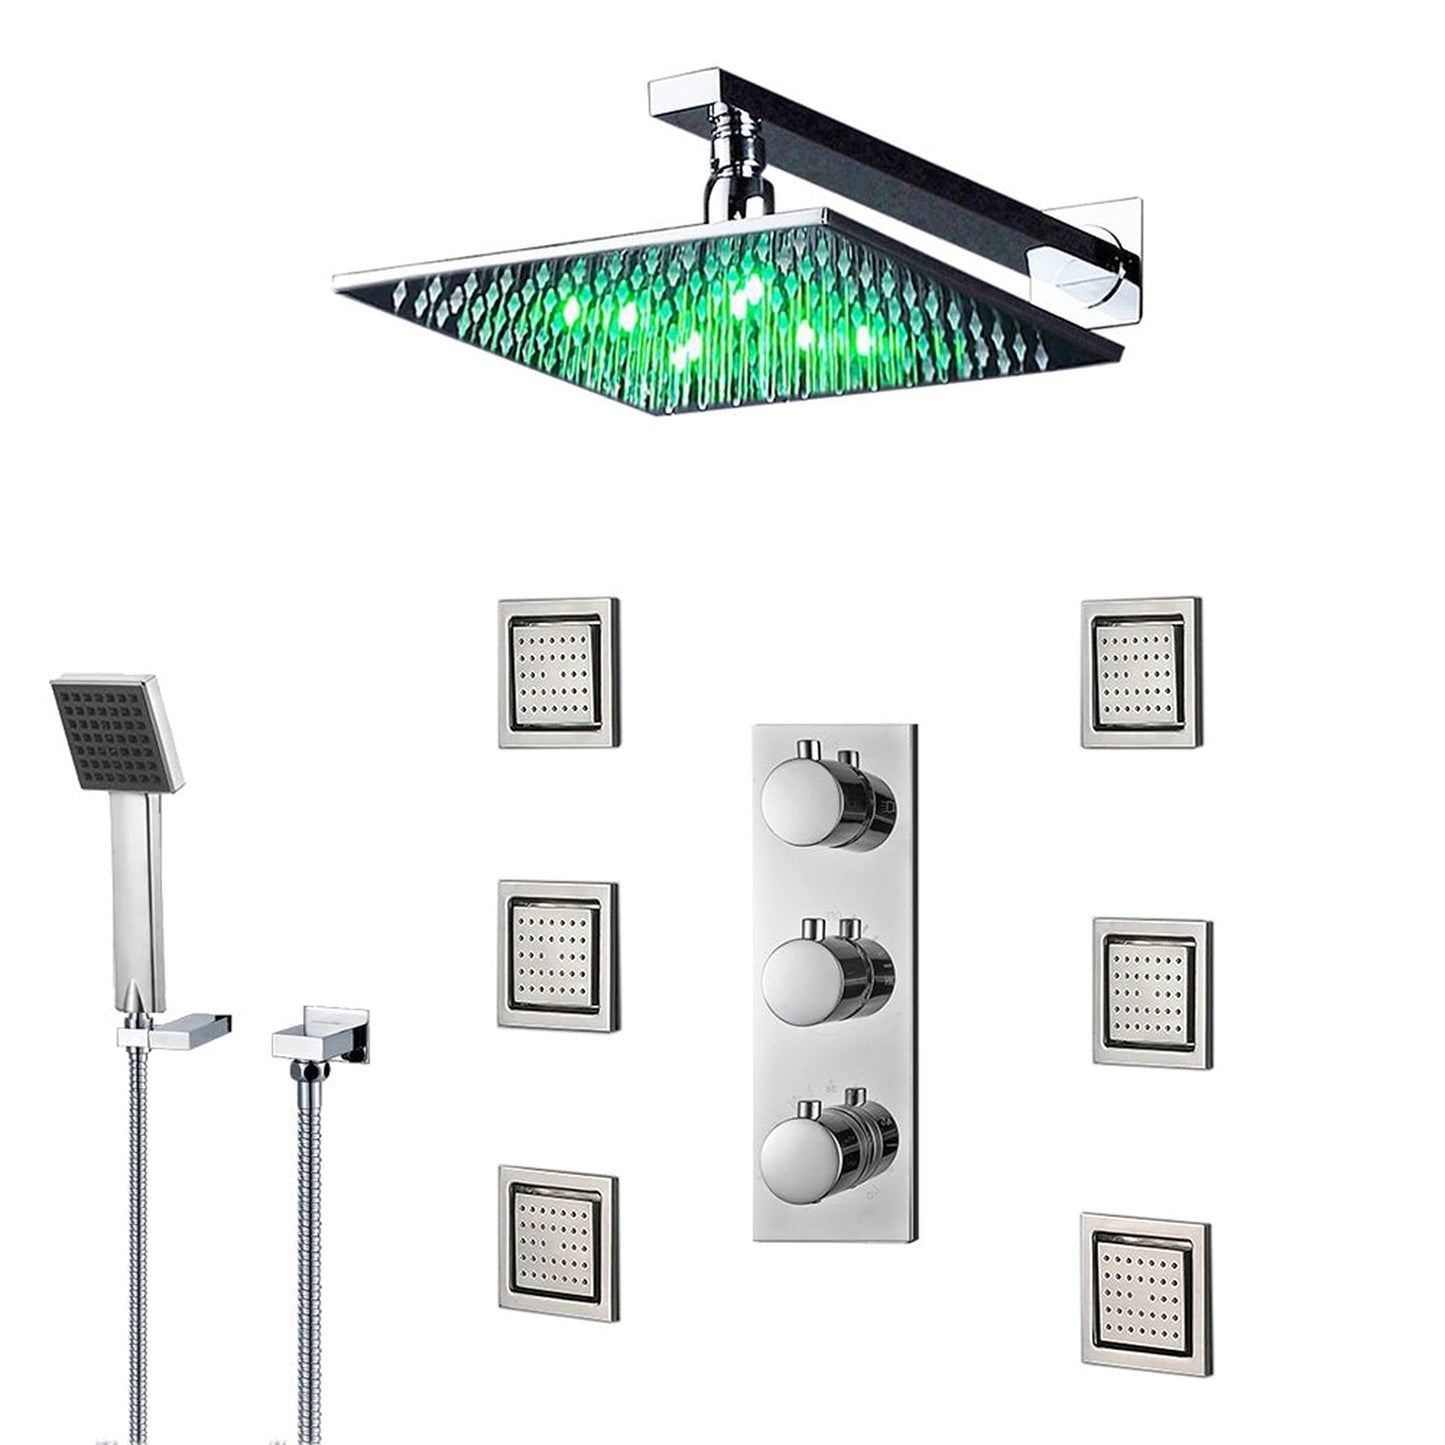 FontanaShowers Milan Creative Luxury 8" Chrome Square Wall-Mounted LED Rainfall Shower System With 6-Jet Stainless Steel Massage Sprays and Hand Shower